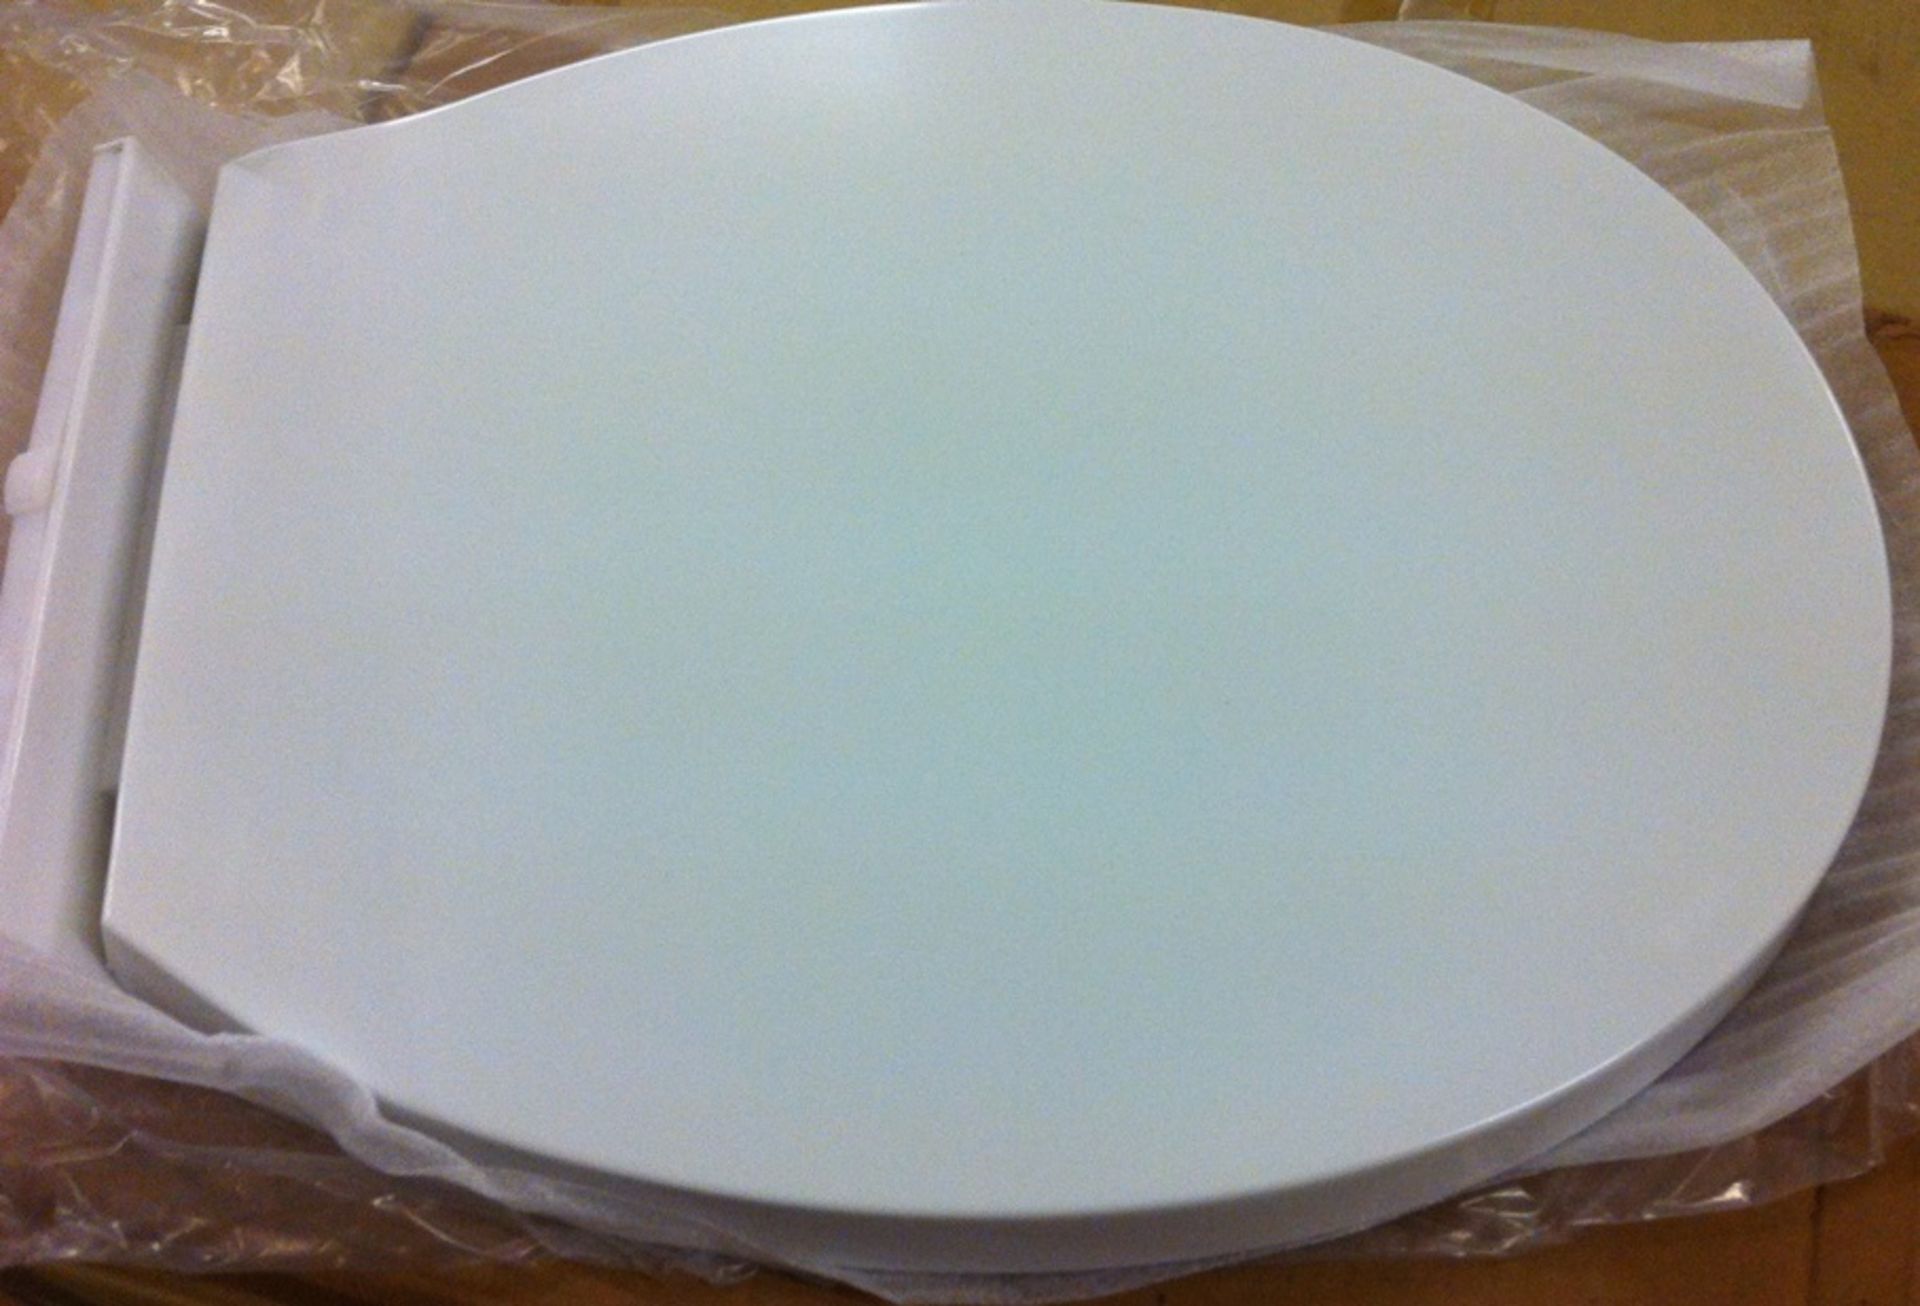 10 x Deluxe Soft Close White Toilet Seats - Brand New Boxed Stock - CL034 - Ideal For Resale - Vogue - Image 5 of 6